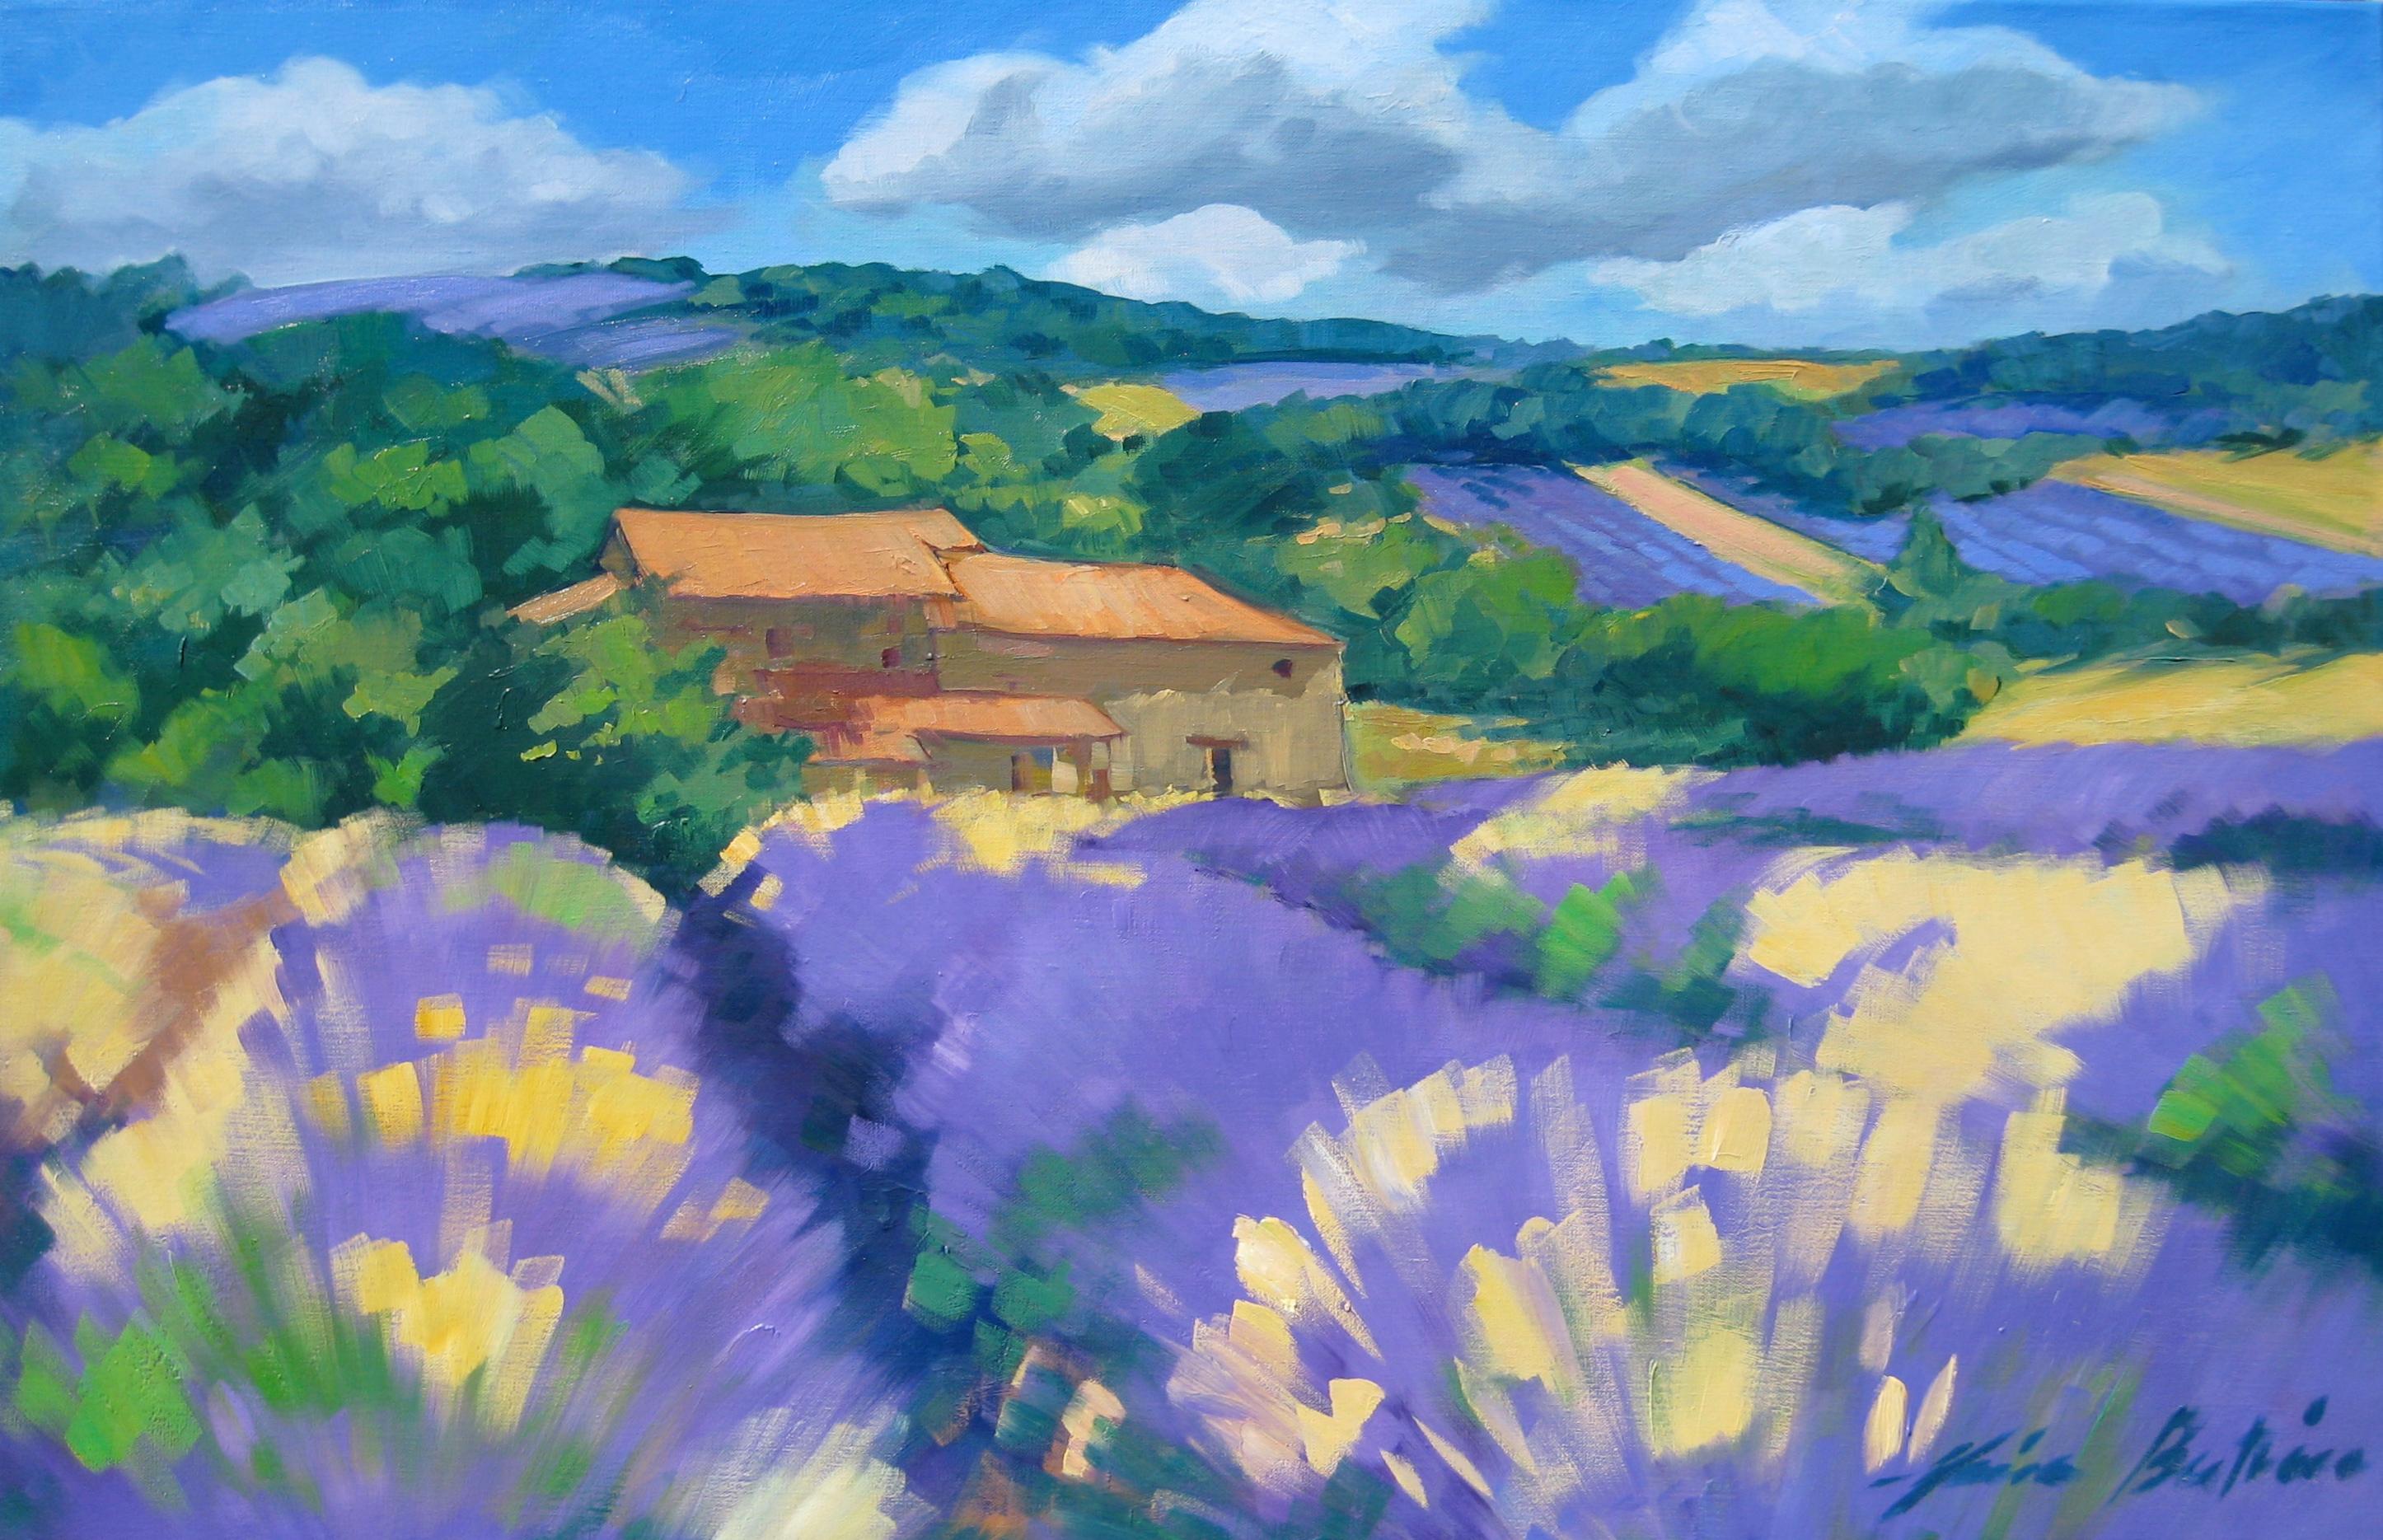 Maria Bertan Landscape Painting - "Sloping Lavender Fields" Contemporary Impressionist Oil Painting, Maria Bertran